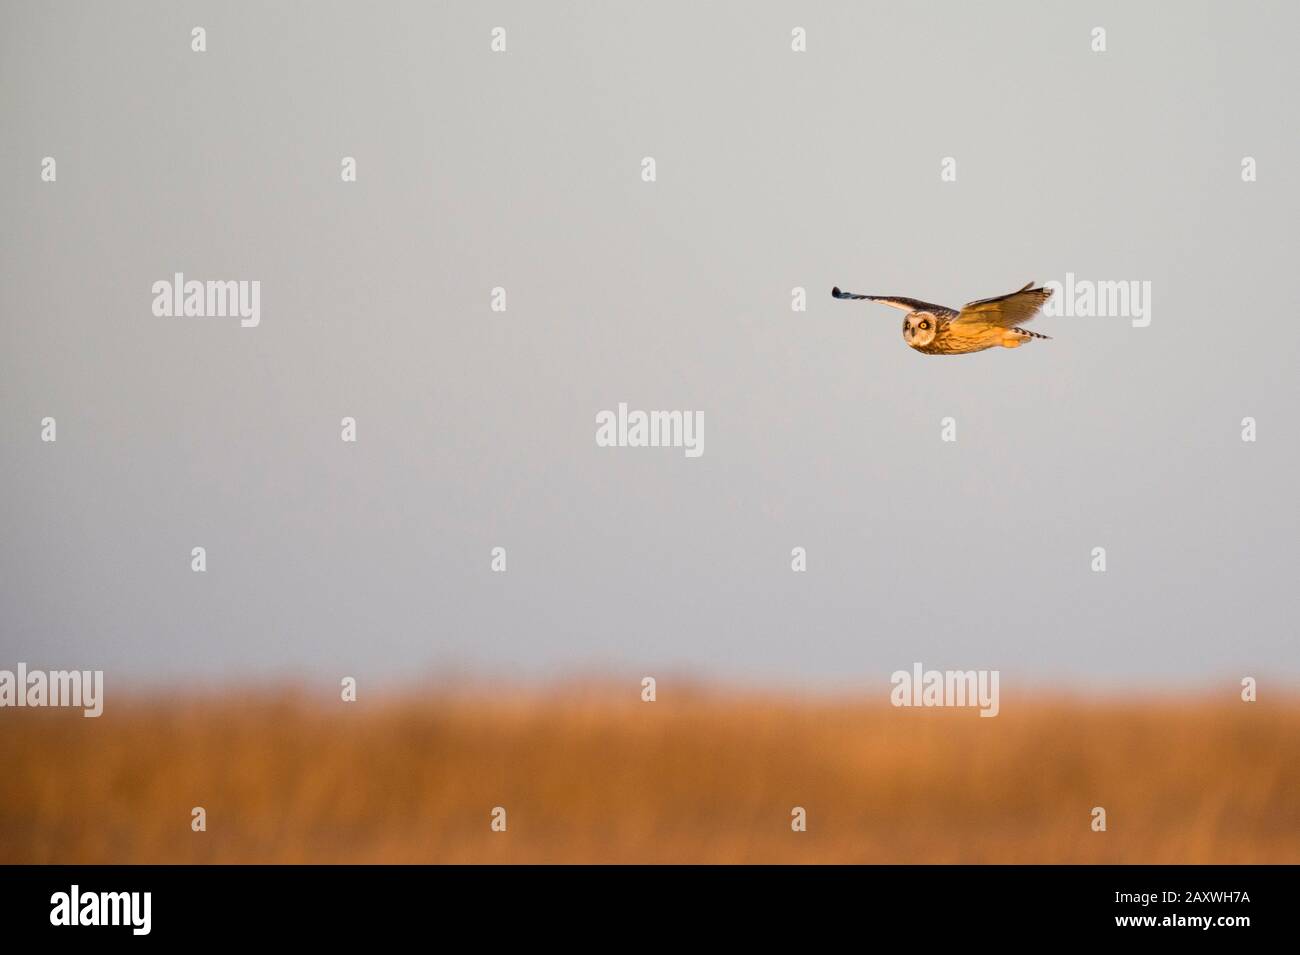 A Short-eared Owl flies over a field of brown grasses glowing in the golden sunlight at sunset. Stock Photo